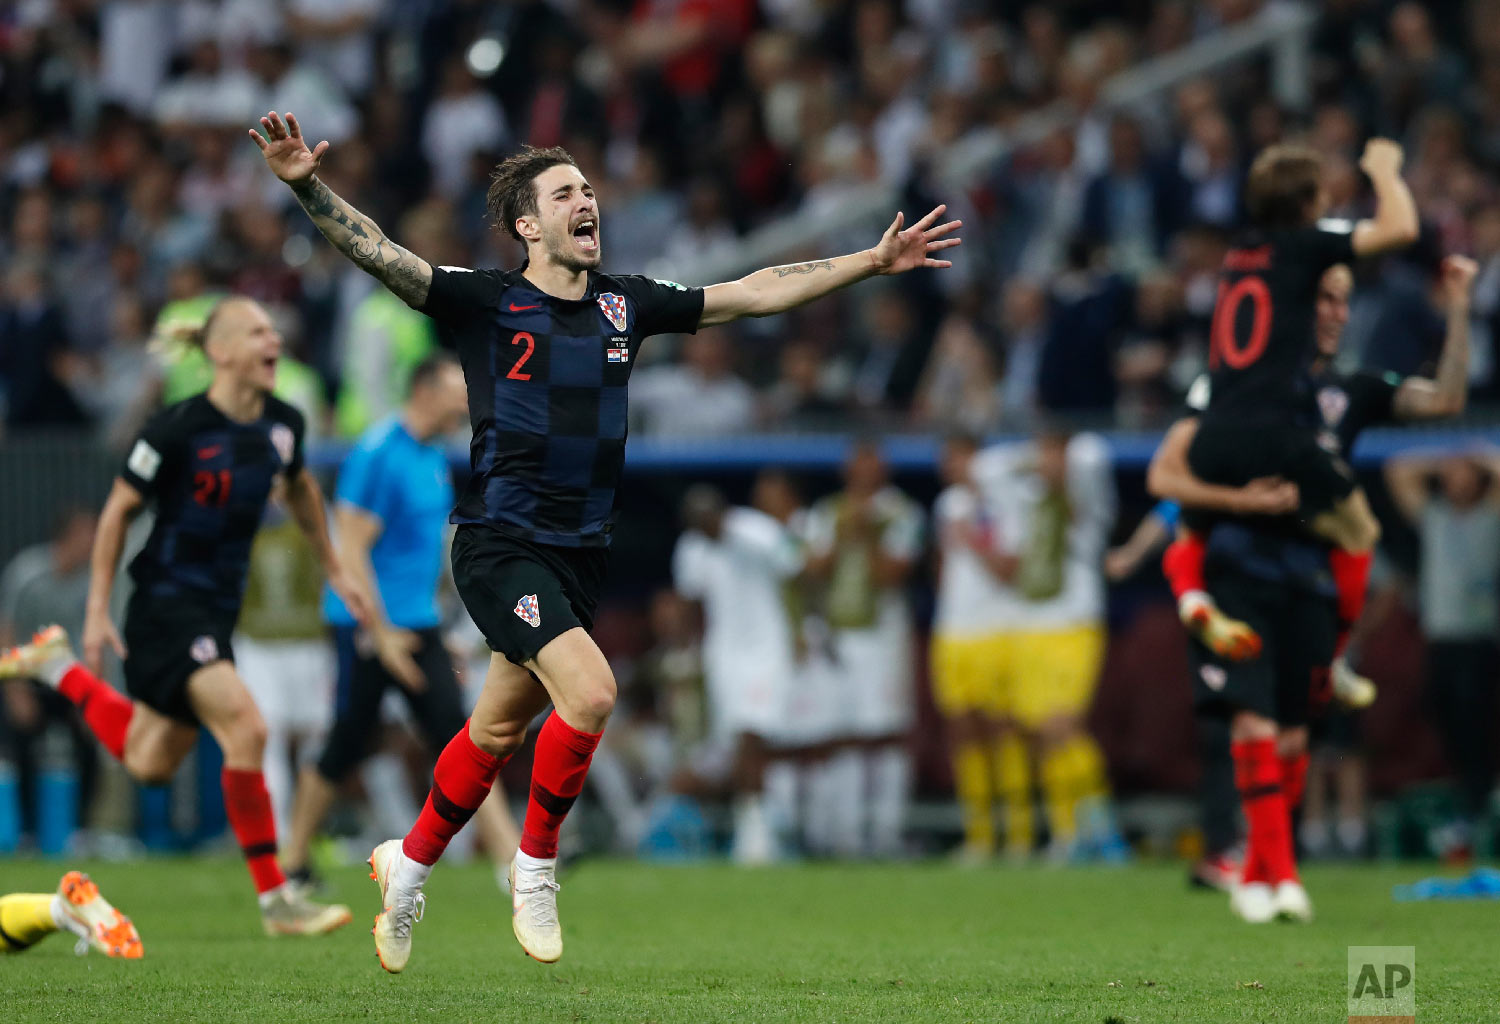  Croatia's Sime Vrsaljko celebrates after his team advanced to the final during the semifinal match between Croatia and England at the 2018 soccer World Cup in the Luzhniki Stadium in Moscow, Russia, Wednesday, July 11, 2018. (AP Photo/Alastair Grant